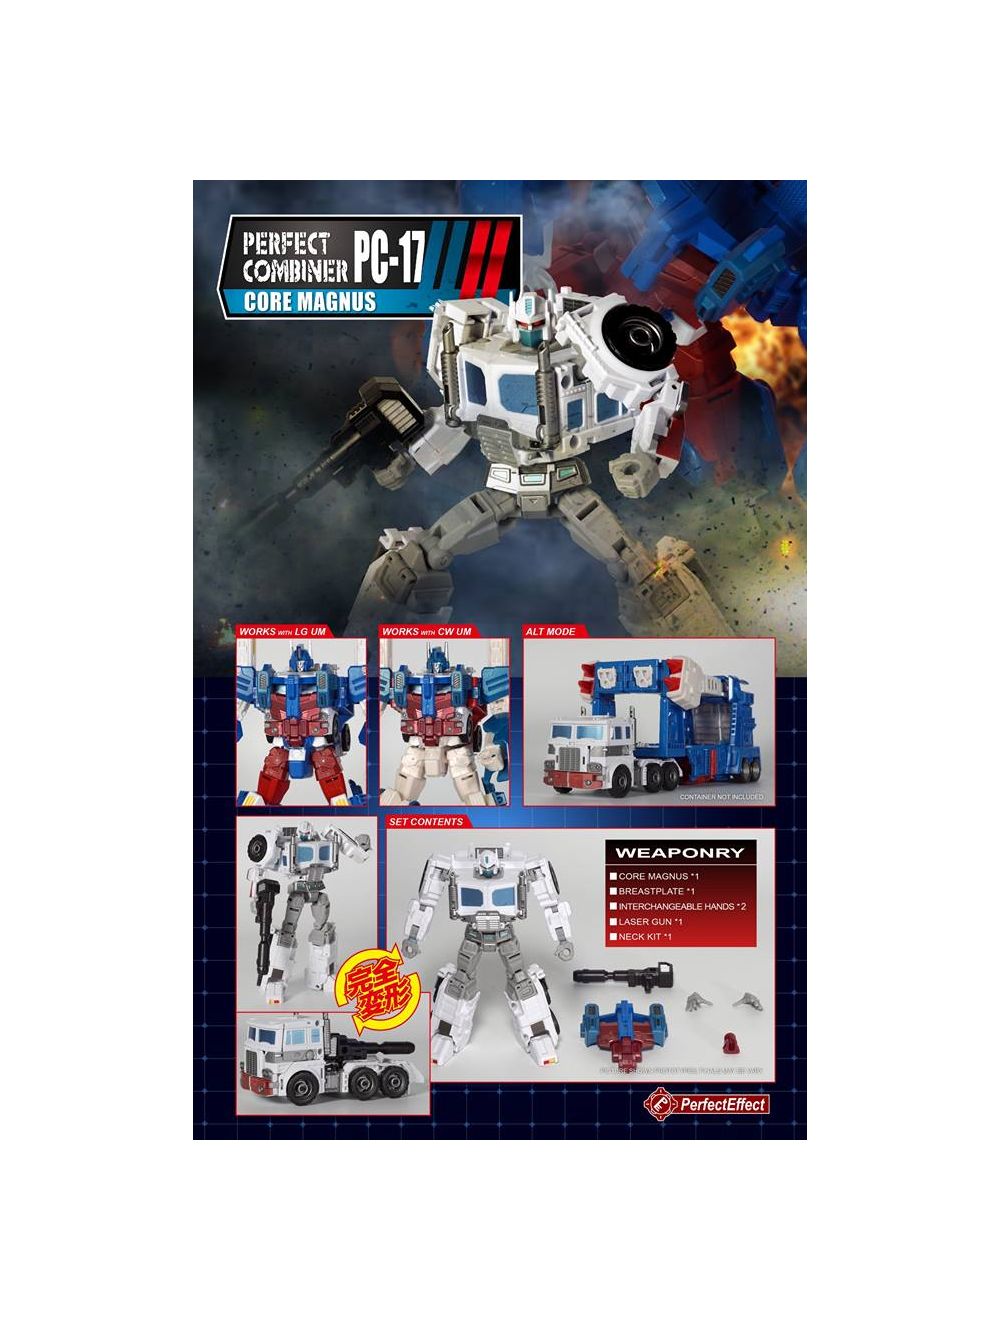 Upgrade Kit for Ultra magnus,In stock! PC-17 Perfect Effect Core Magnus